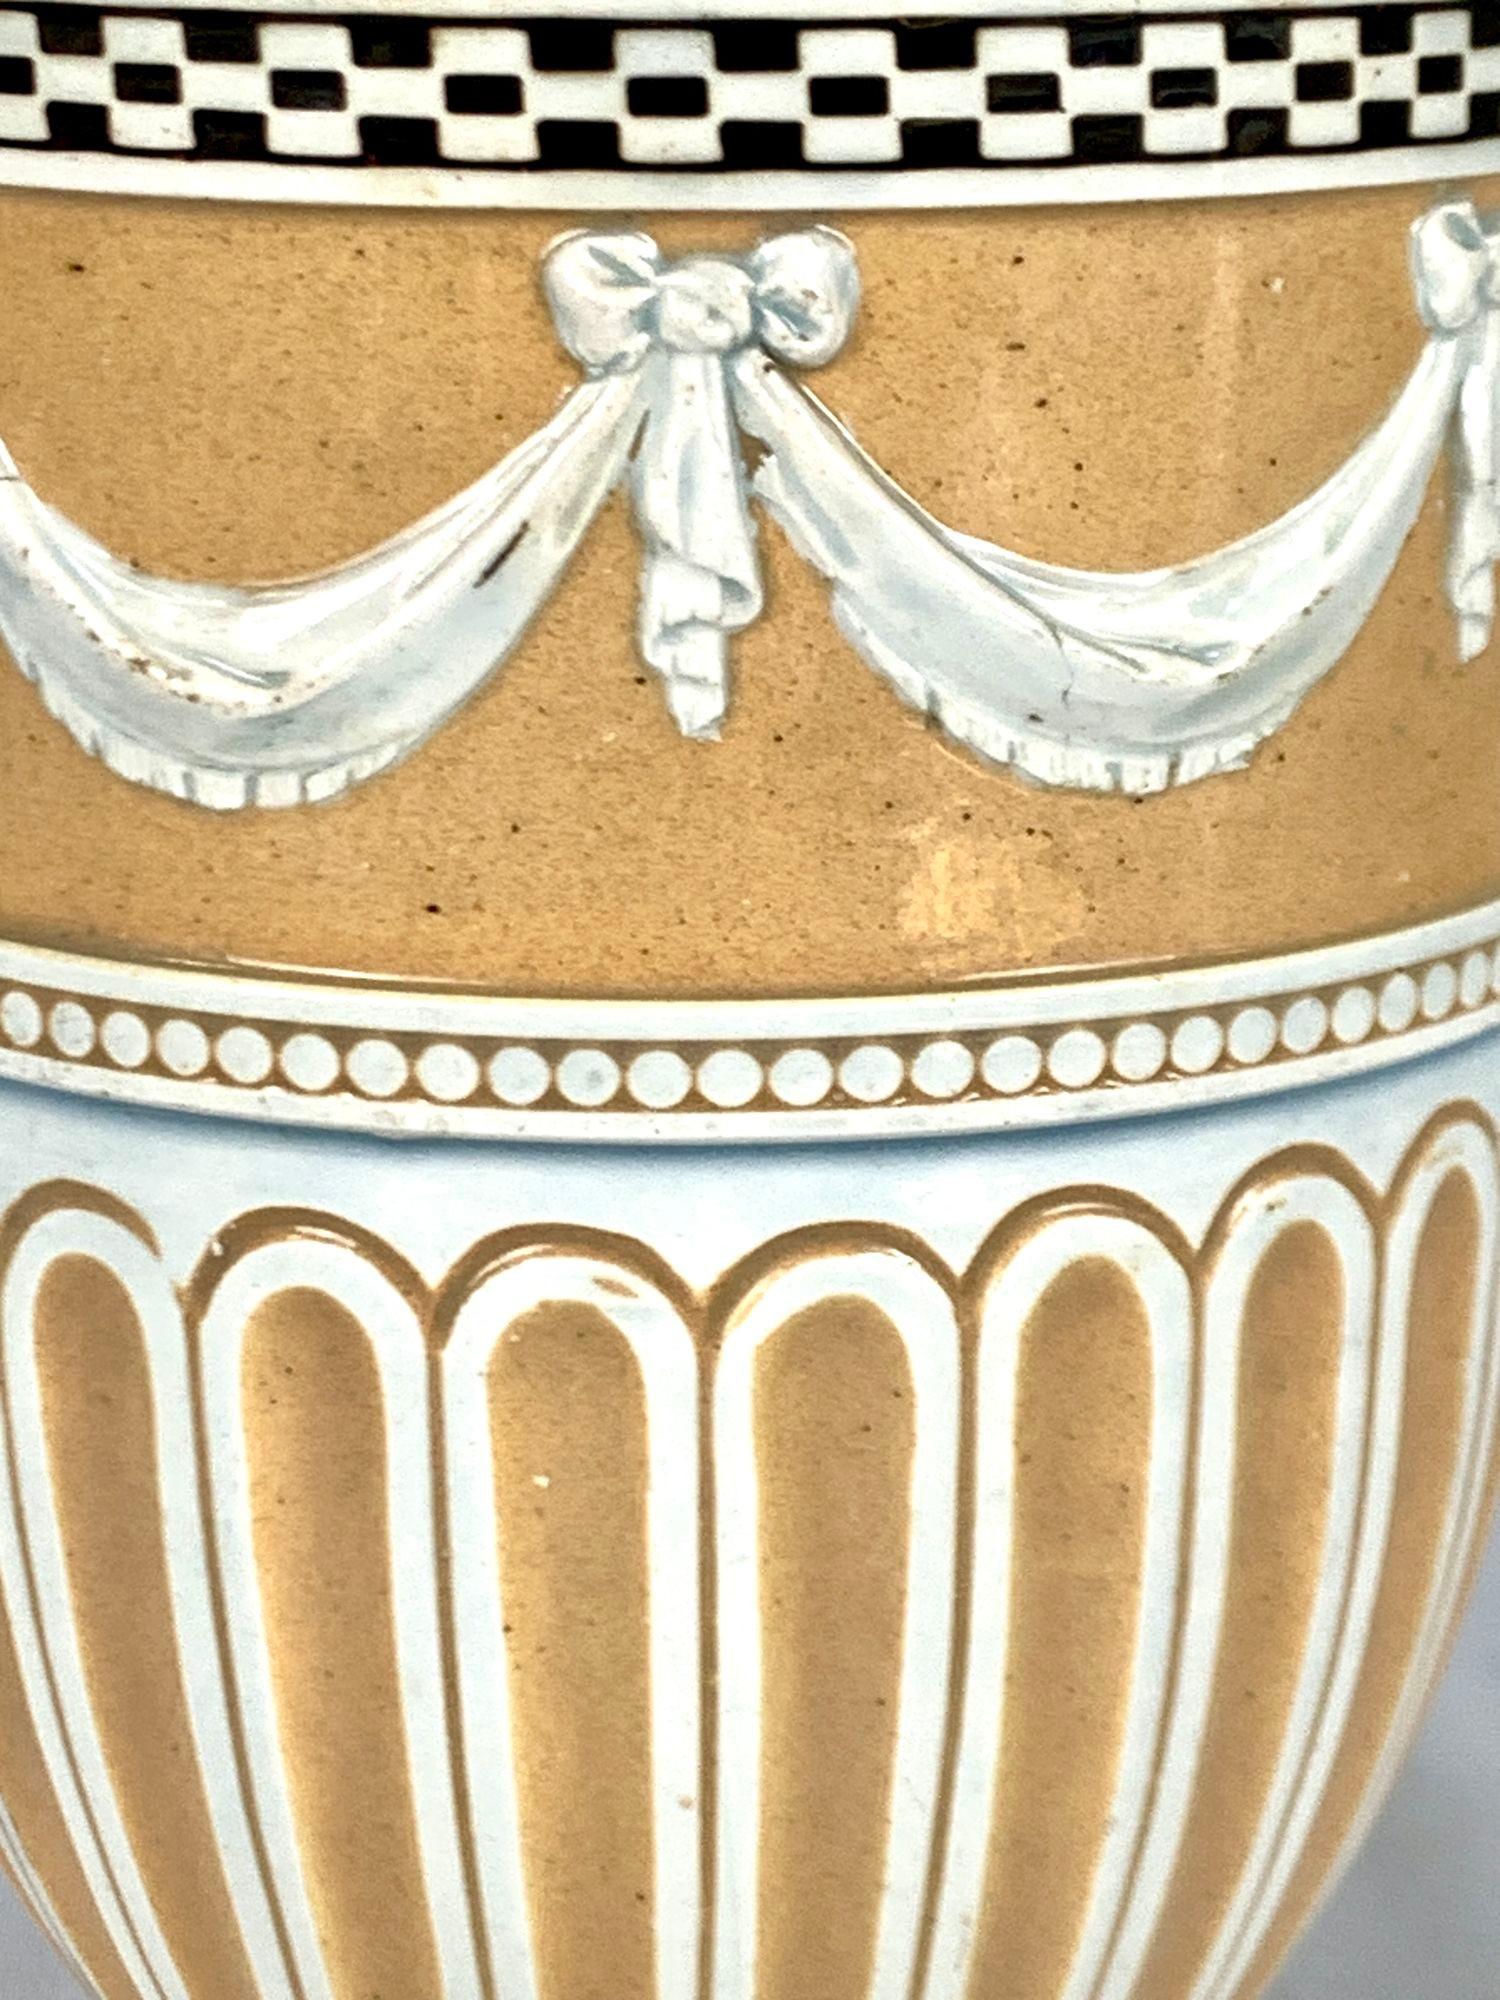 Wedgwood Slip Decorated Creamware Vase Made England Circa 1810 In Excellent Condition For Sale In Katonah, NY